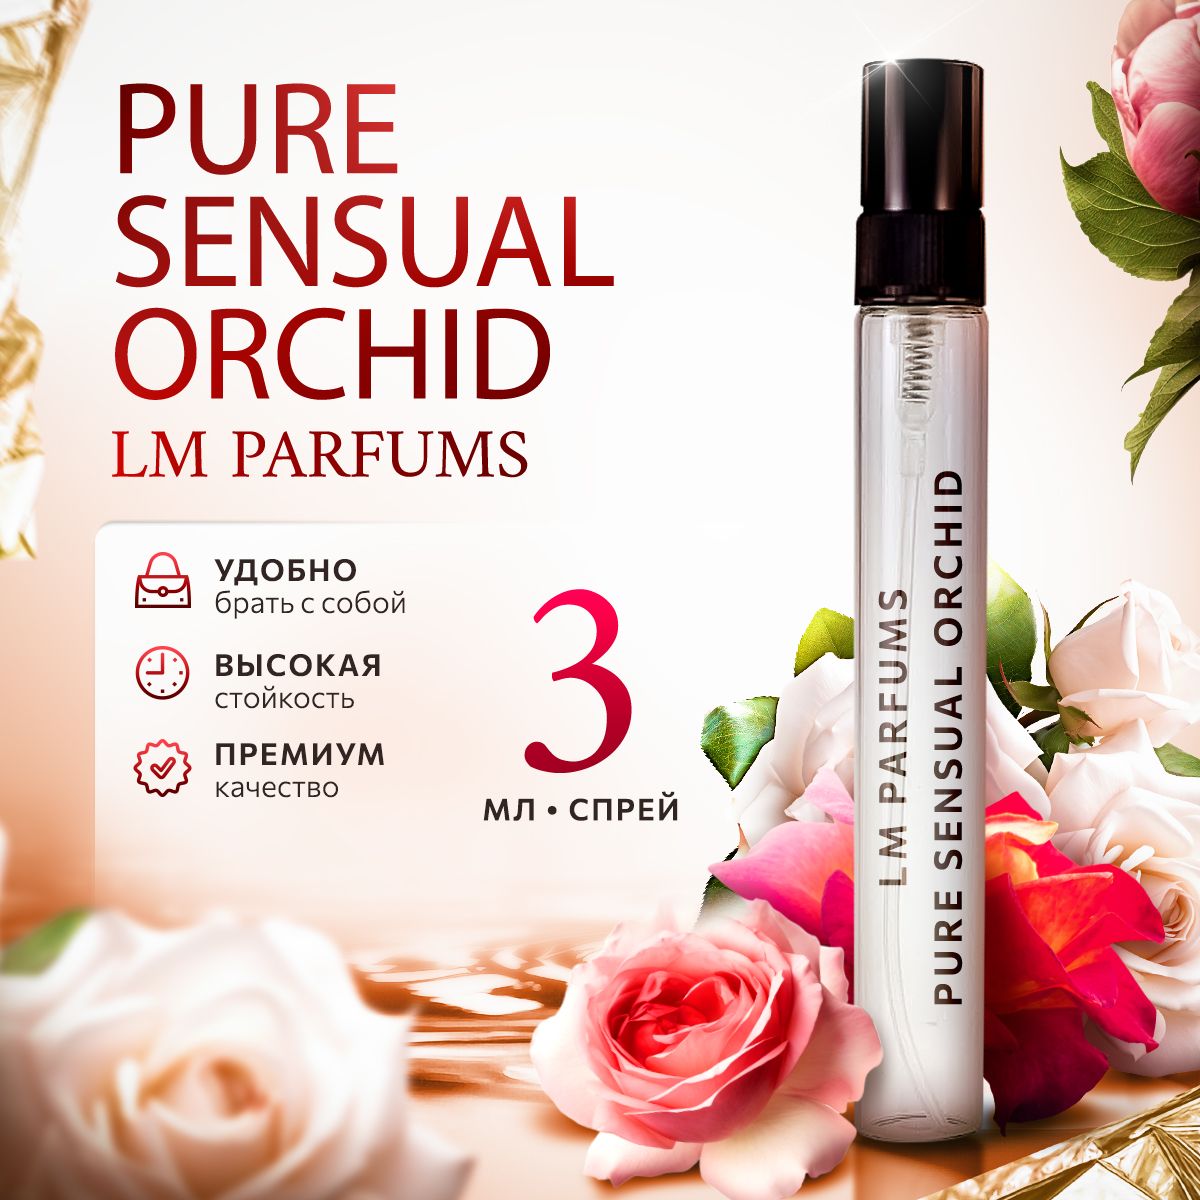 Sensual orchid lm. LM Parfums Pure sensual Orchid EDP. LM Parfums kingkydise.